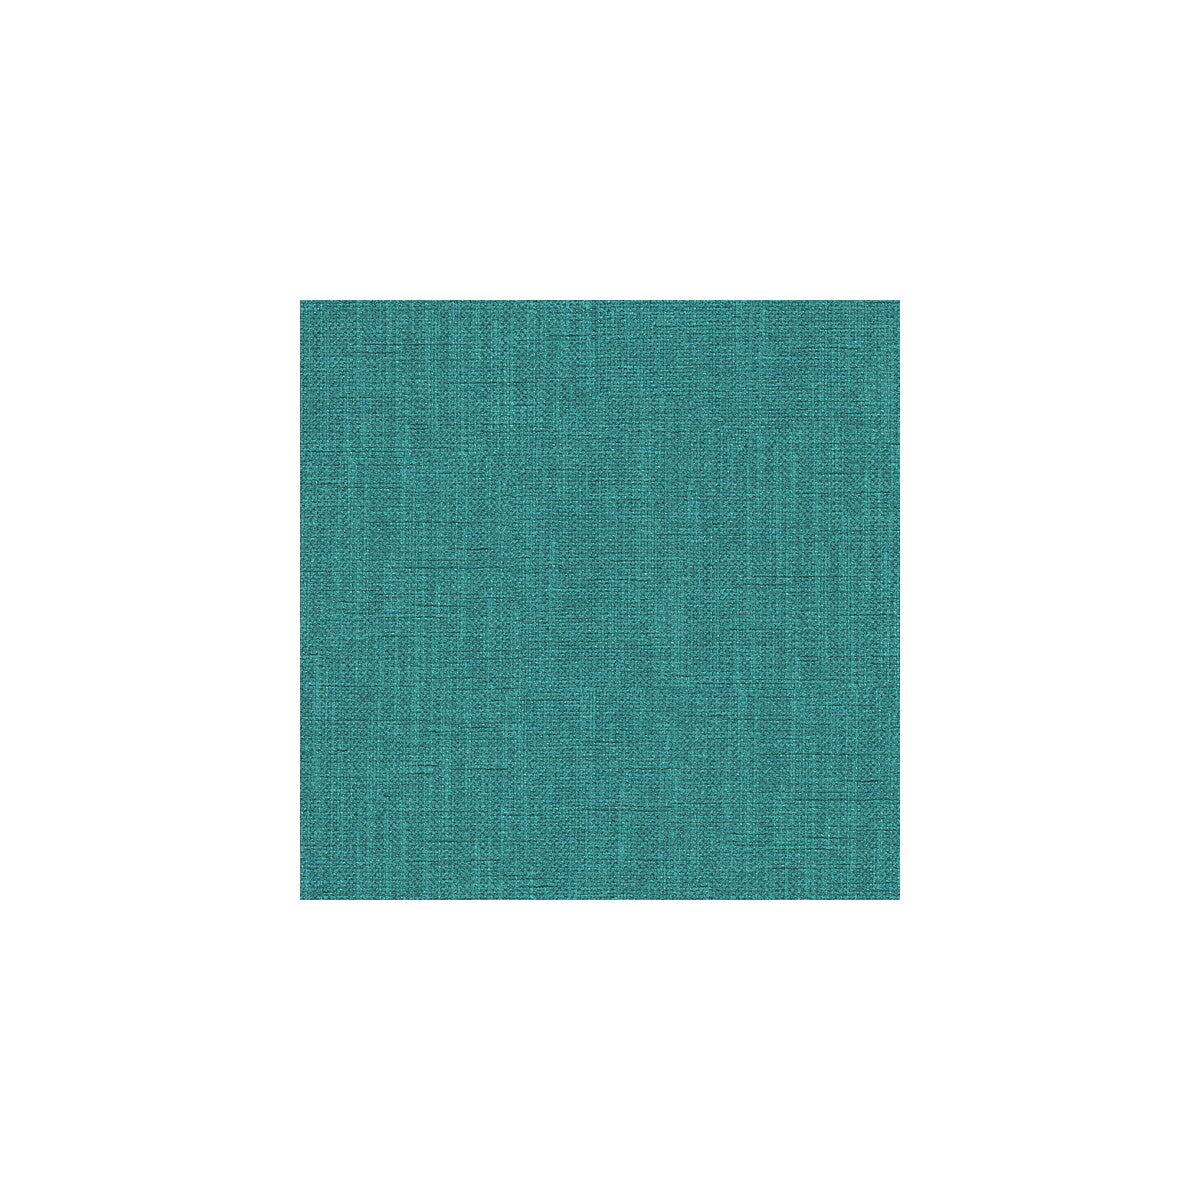 Kravet Basics fabric in 33120-35 color - pattern 33120.35.0 - by Kravet Basics in the Perfect Plains collection